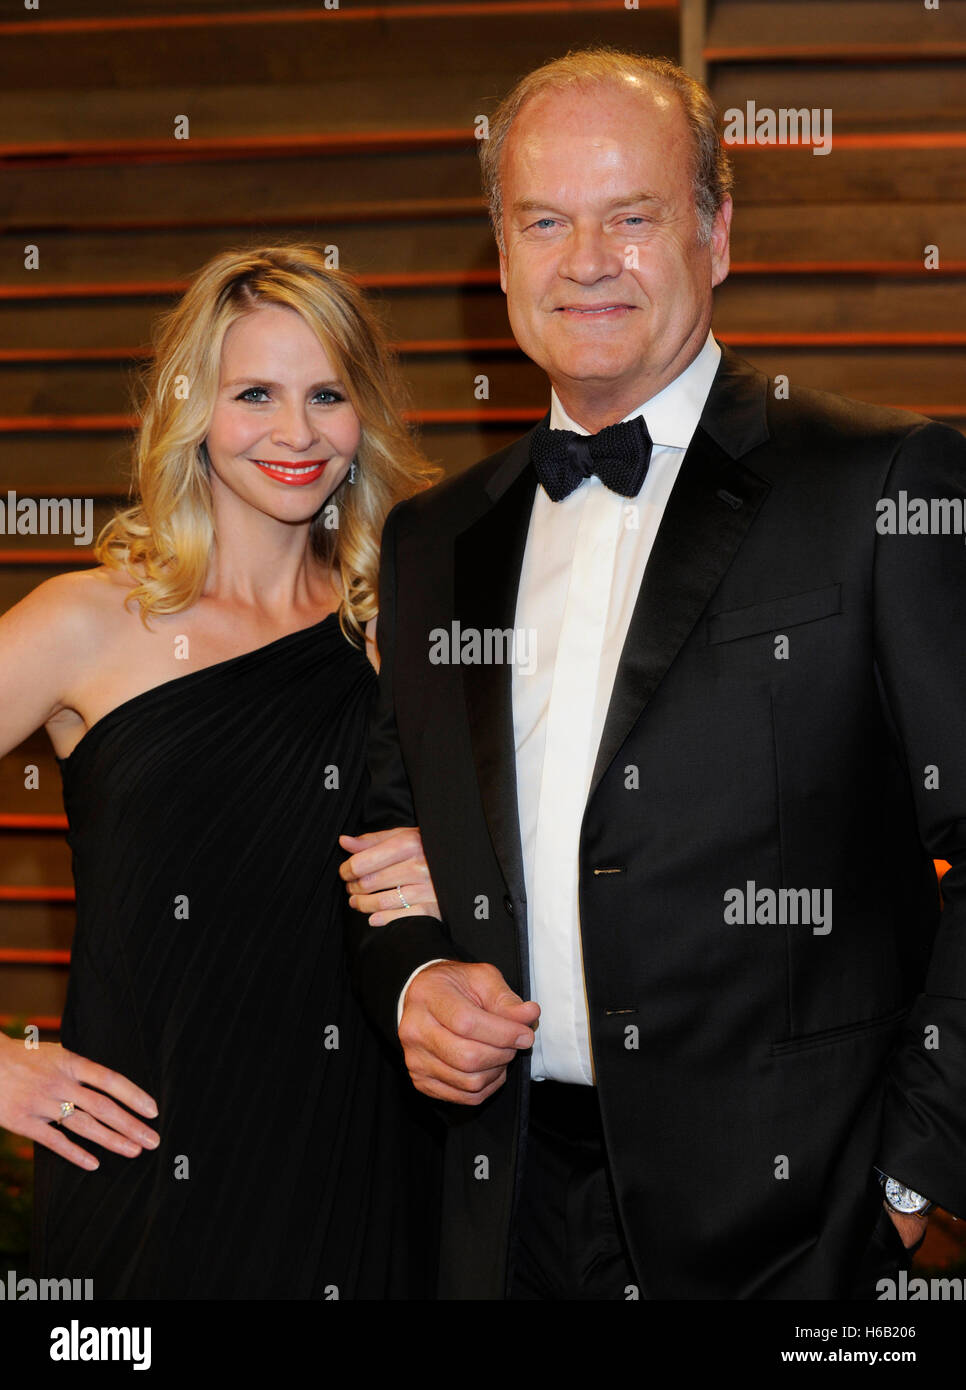 Actor Kelsey Grammer (R) and wife Kayte Walsh attends the 2014 Vanity Fair Oscar Party on March 2, 2014 in West Hollywood, California. Stock Photo